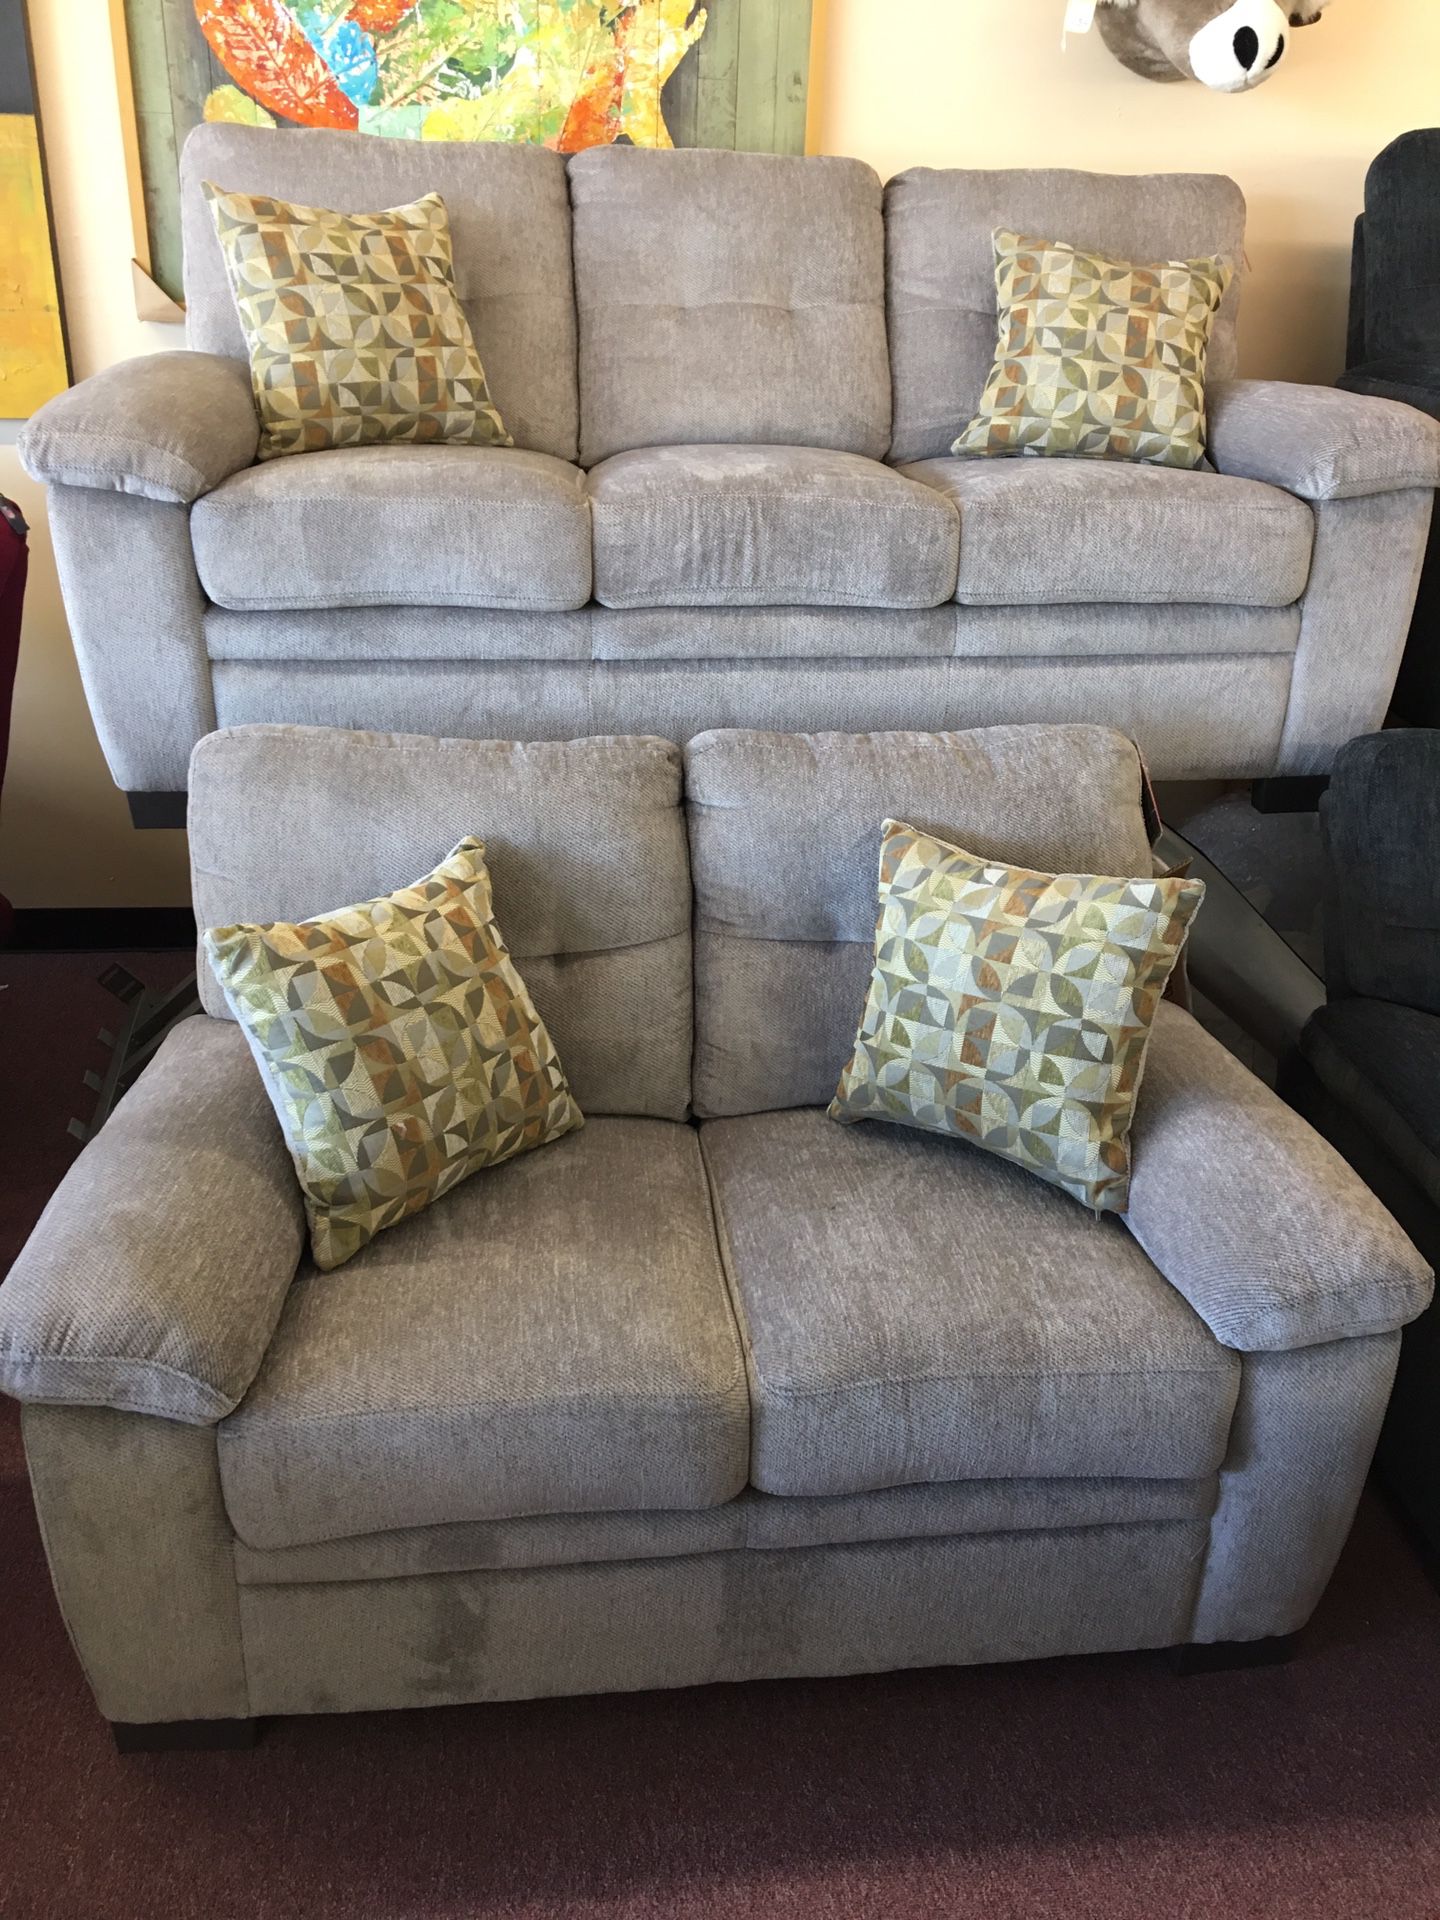 💥HUGE Blowout Furniture Sale!💥 Brand New Gray Sofa Loveseat Set W/ Accent Pillows! $50 Down Takes It Home Today!